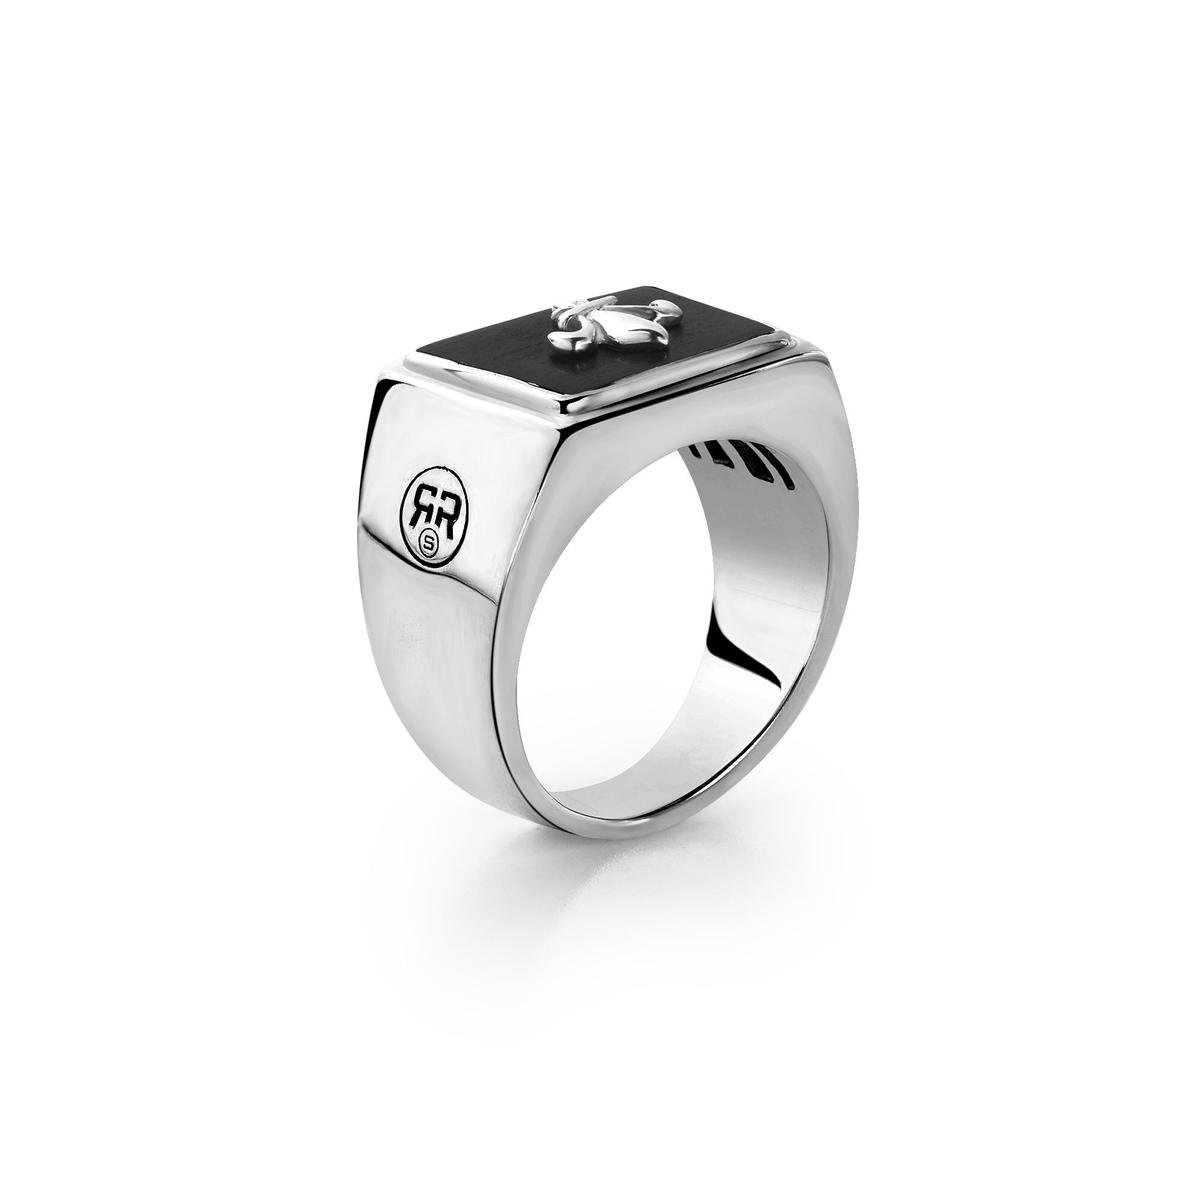 Rebel&Rose - Ring Square Scout L (66) - 925 Silver